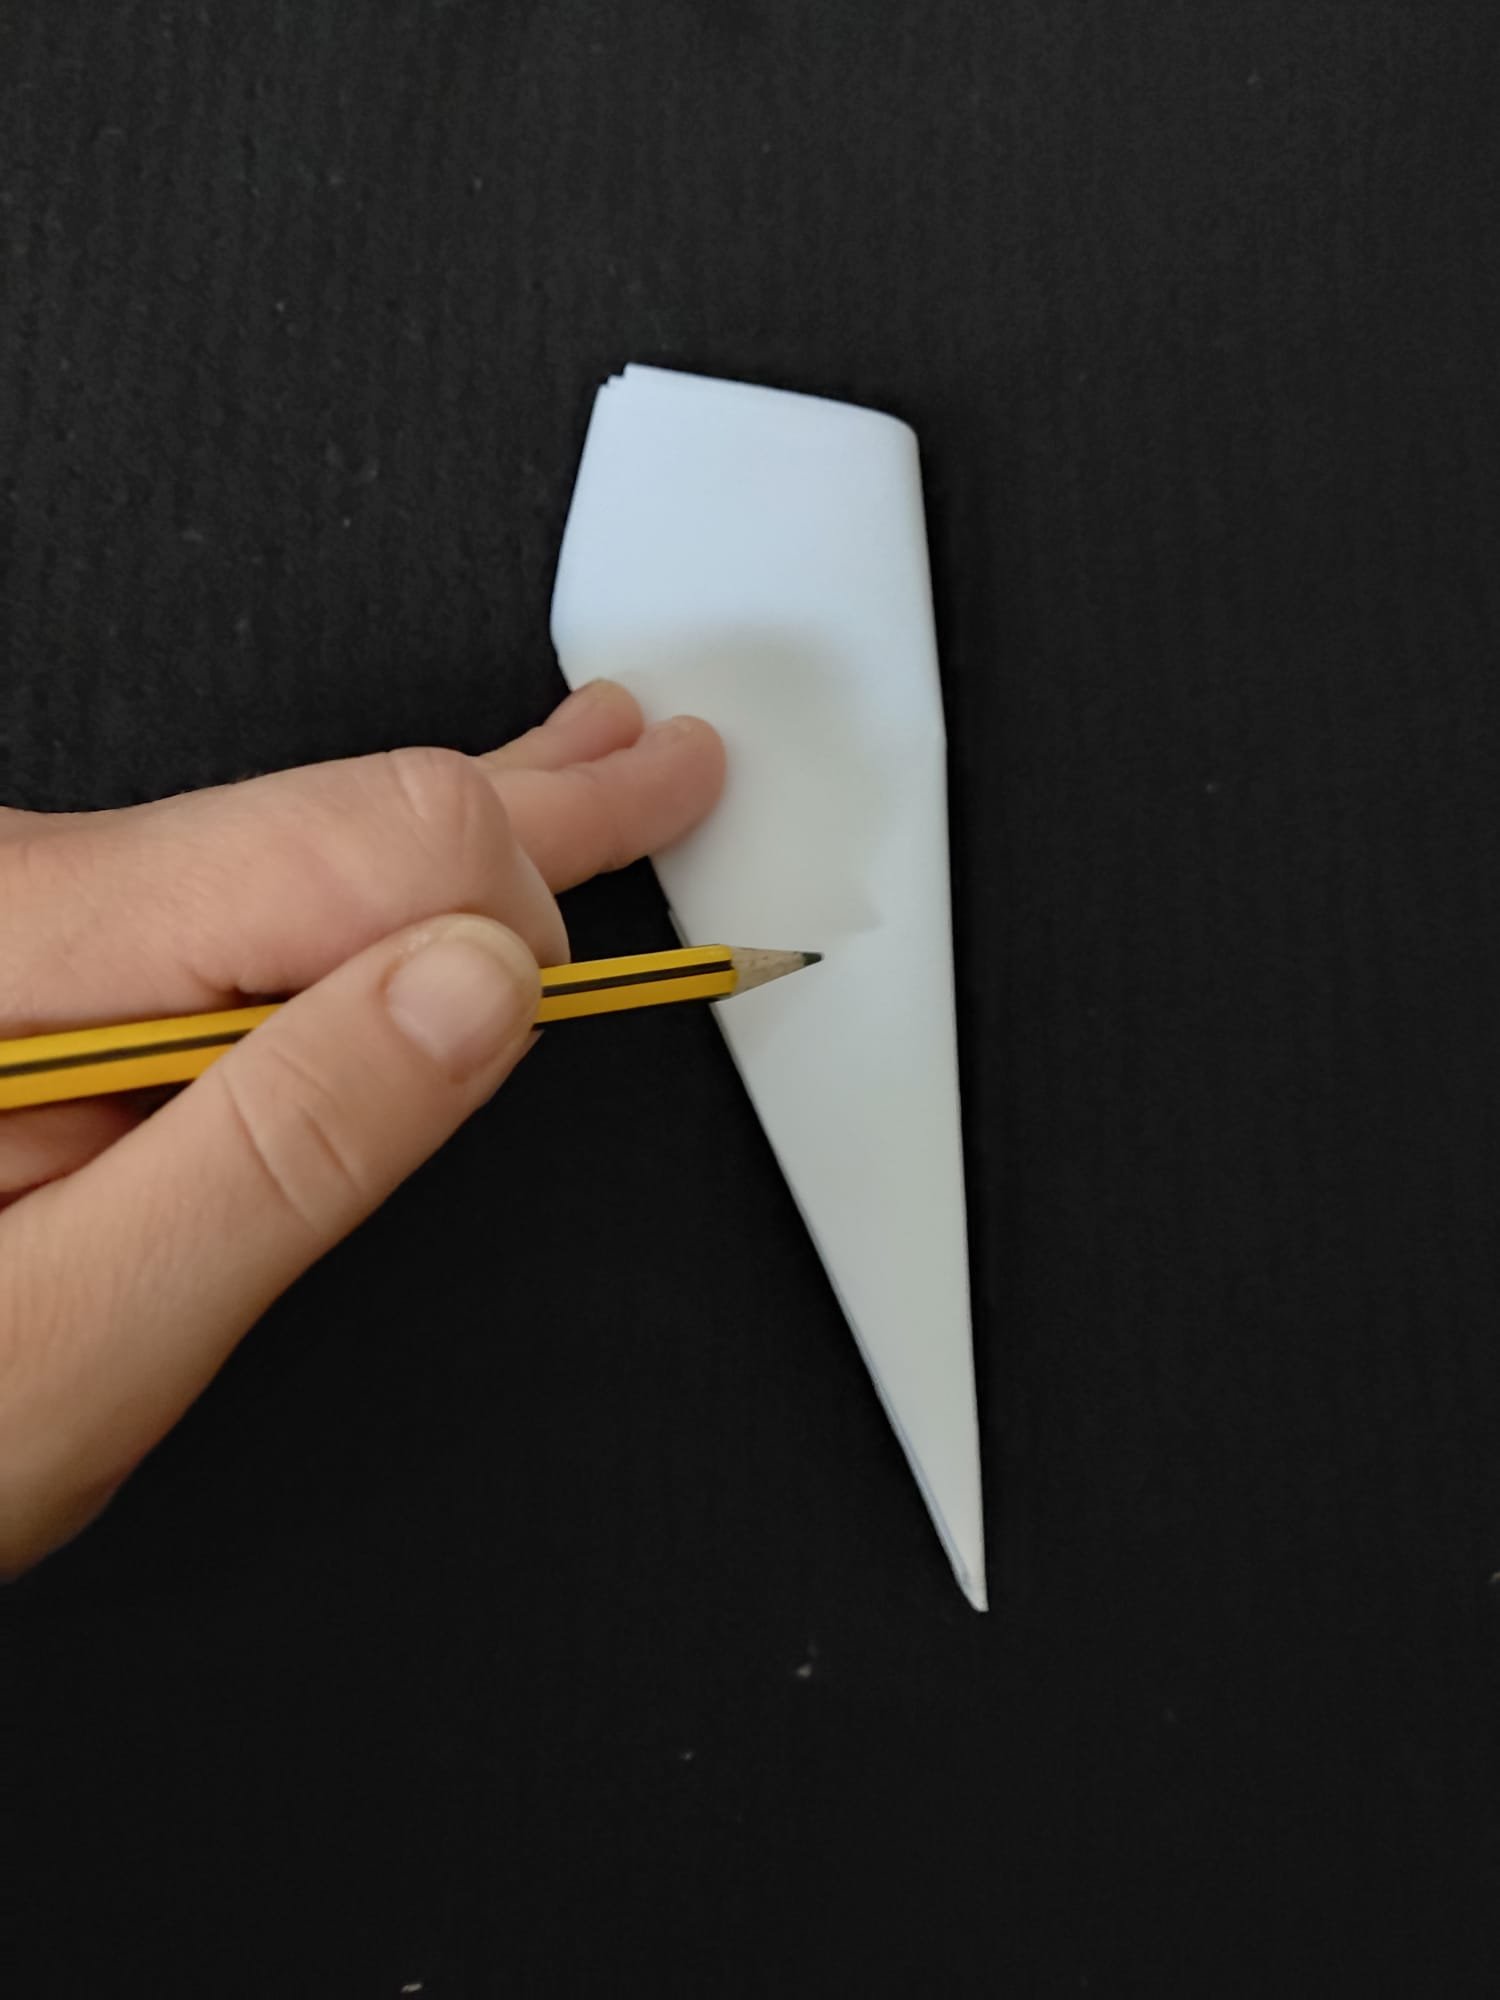 Drawing a snowflake design on a folded triangle piece of paper